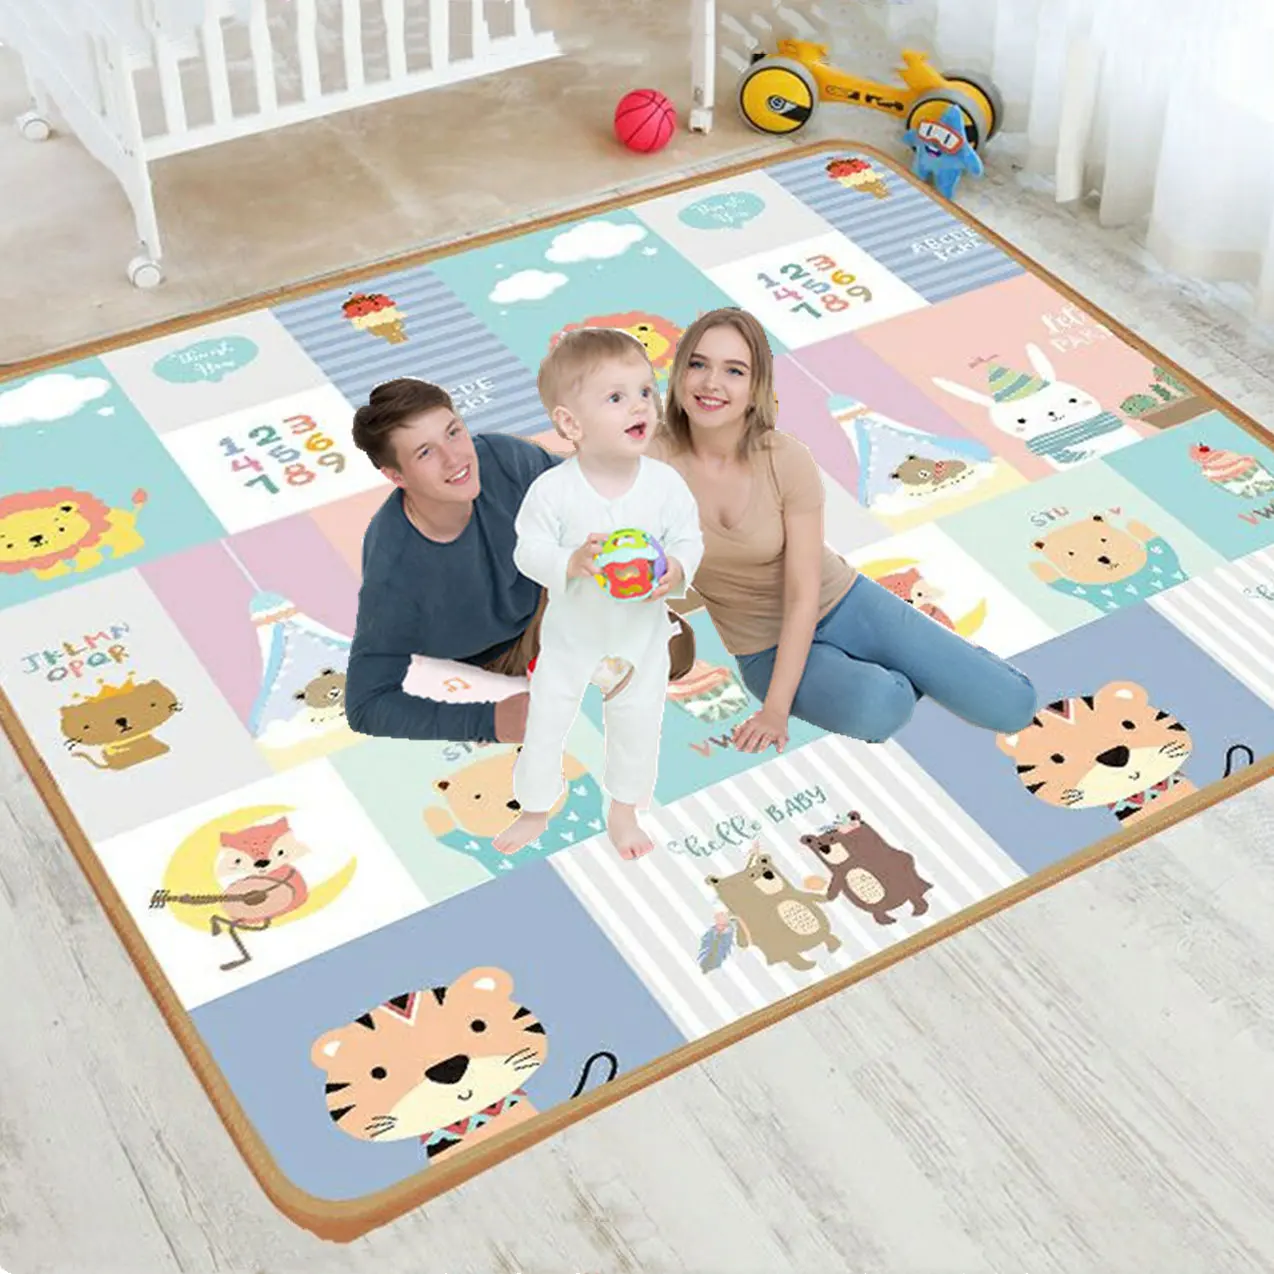 200cm180cm xpe baby play mat toys for children rug playmat developing mat baby room crawling pad folding mat baby carpet free global shipping